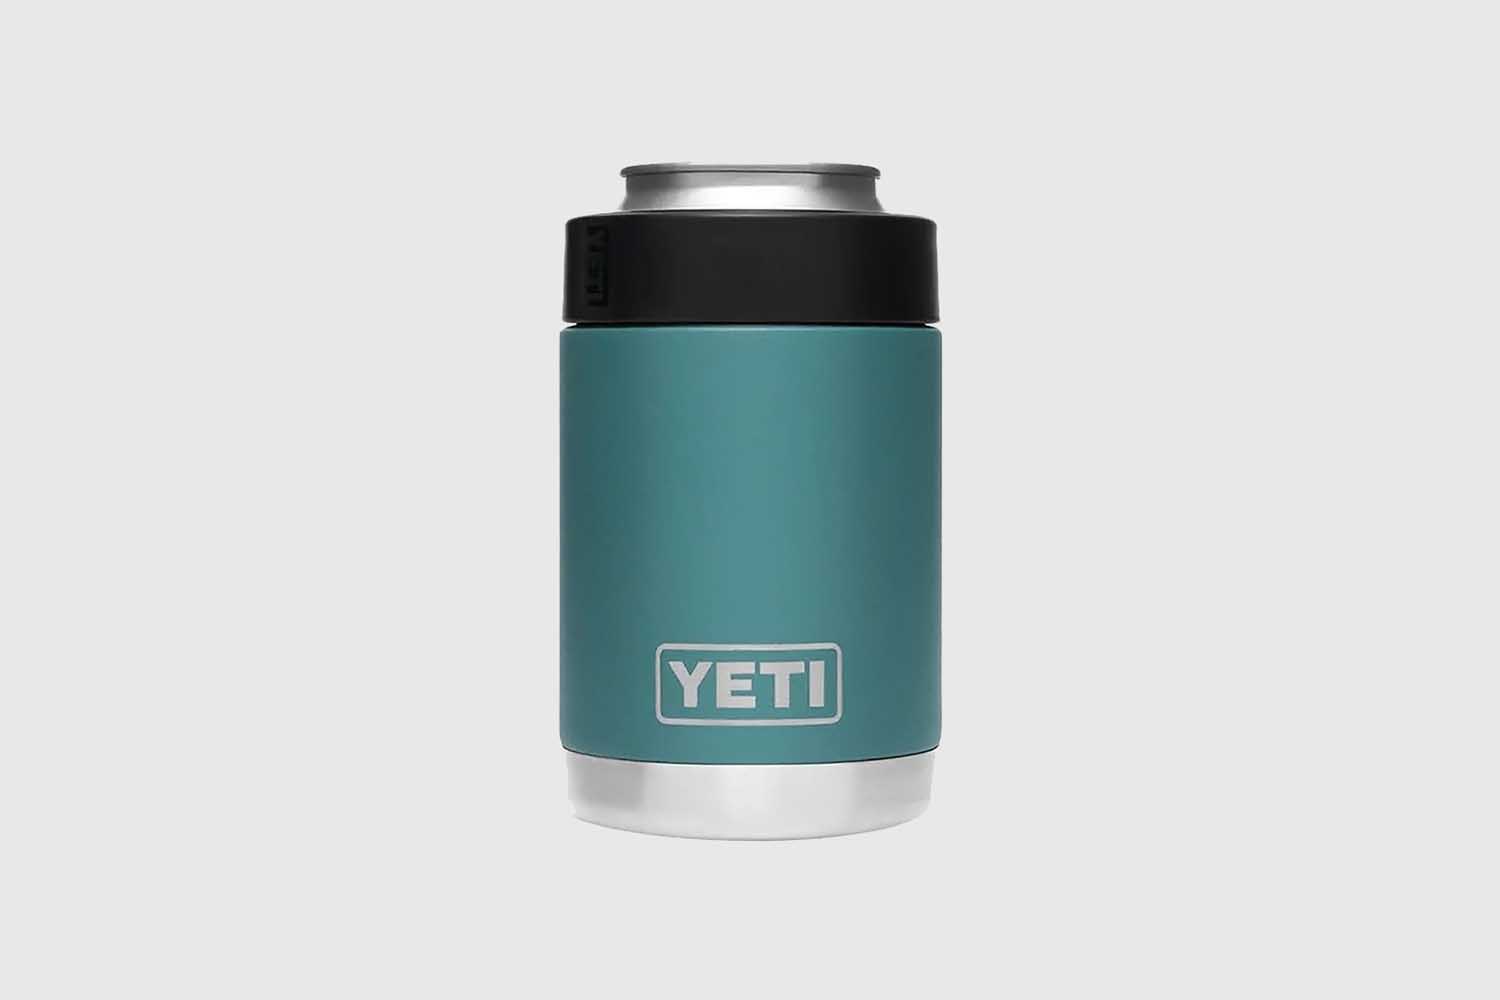 Deal: YETI's Must-Have Rambler Colster Is on Sale